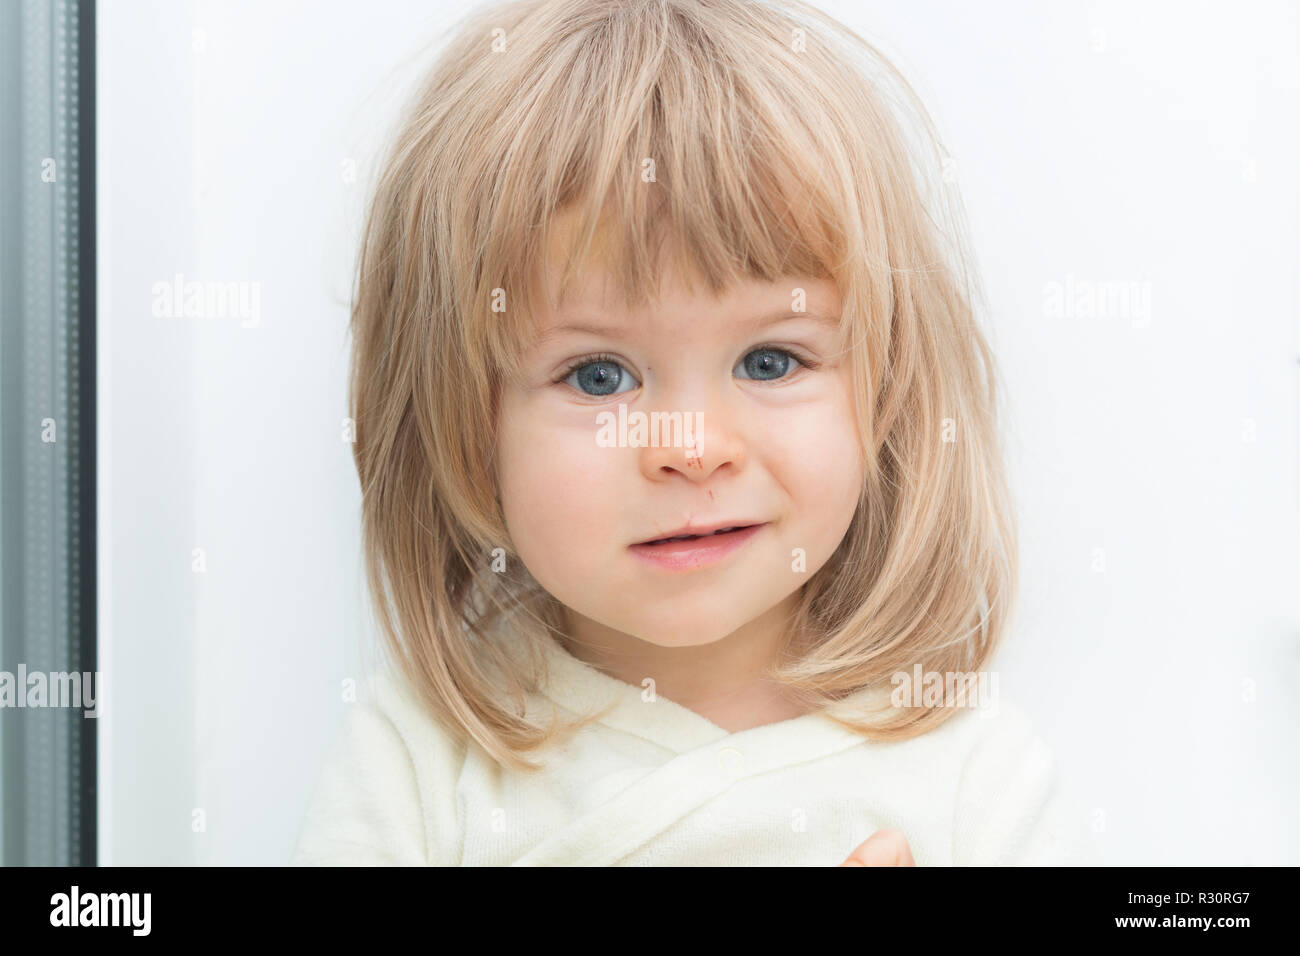 Headshot of adorable cute blonde female child looking at camera with serious upset facial expression. Smirk on face. Pretty little girl with Caucasian traits and scratch on her nose. Attractive baby Stock Photo